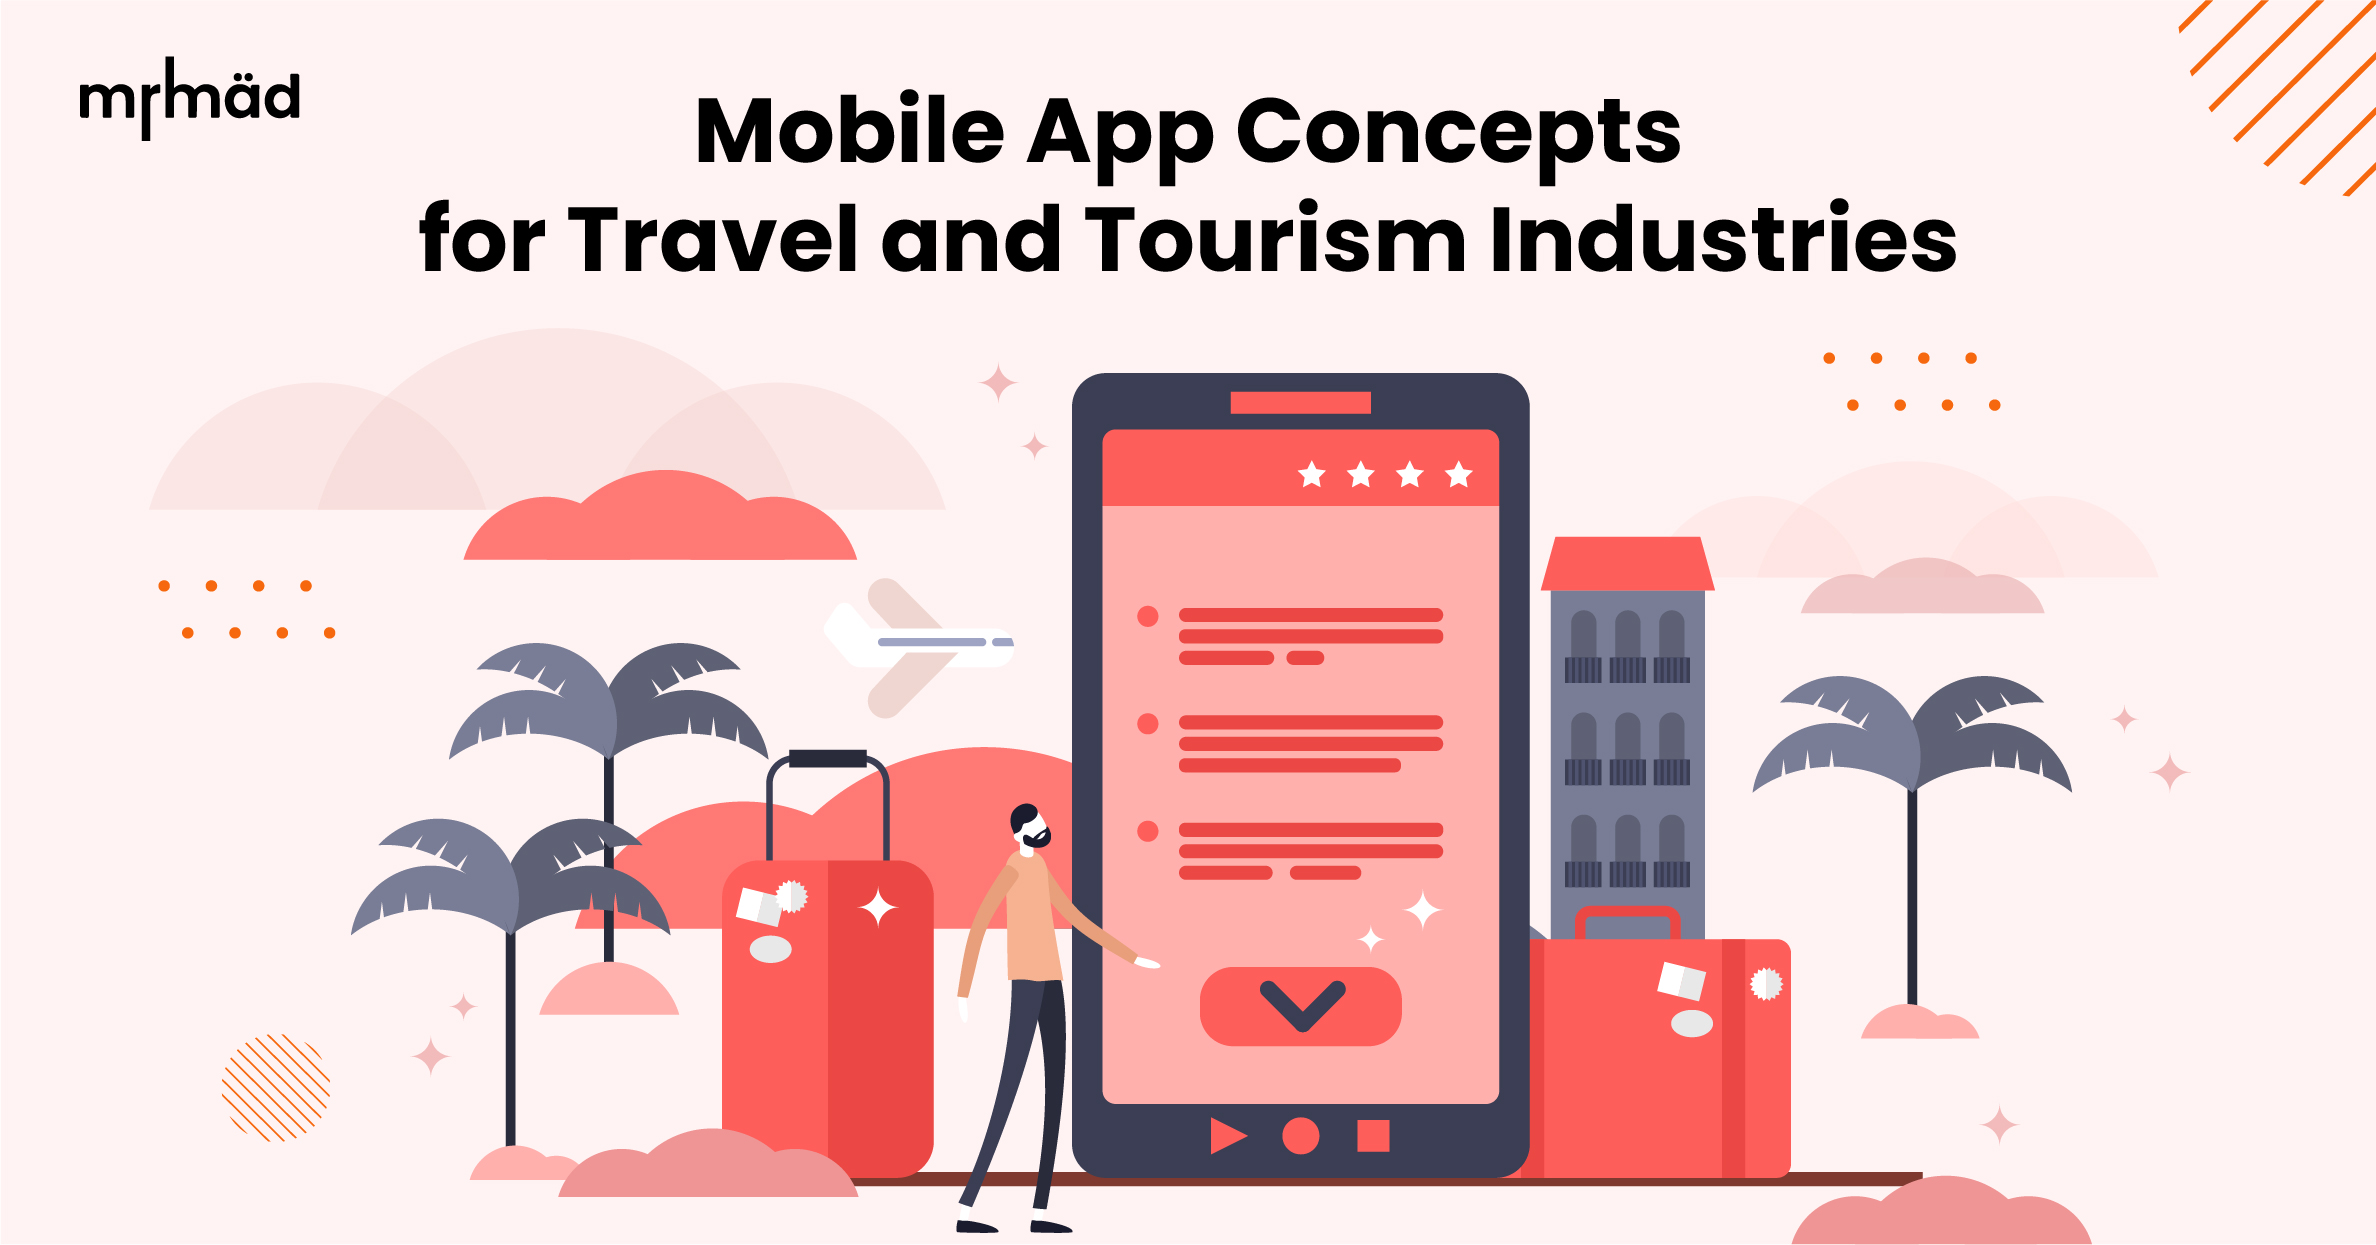 Top 10 Mobile App Concepts for Travel and Tourism Industries